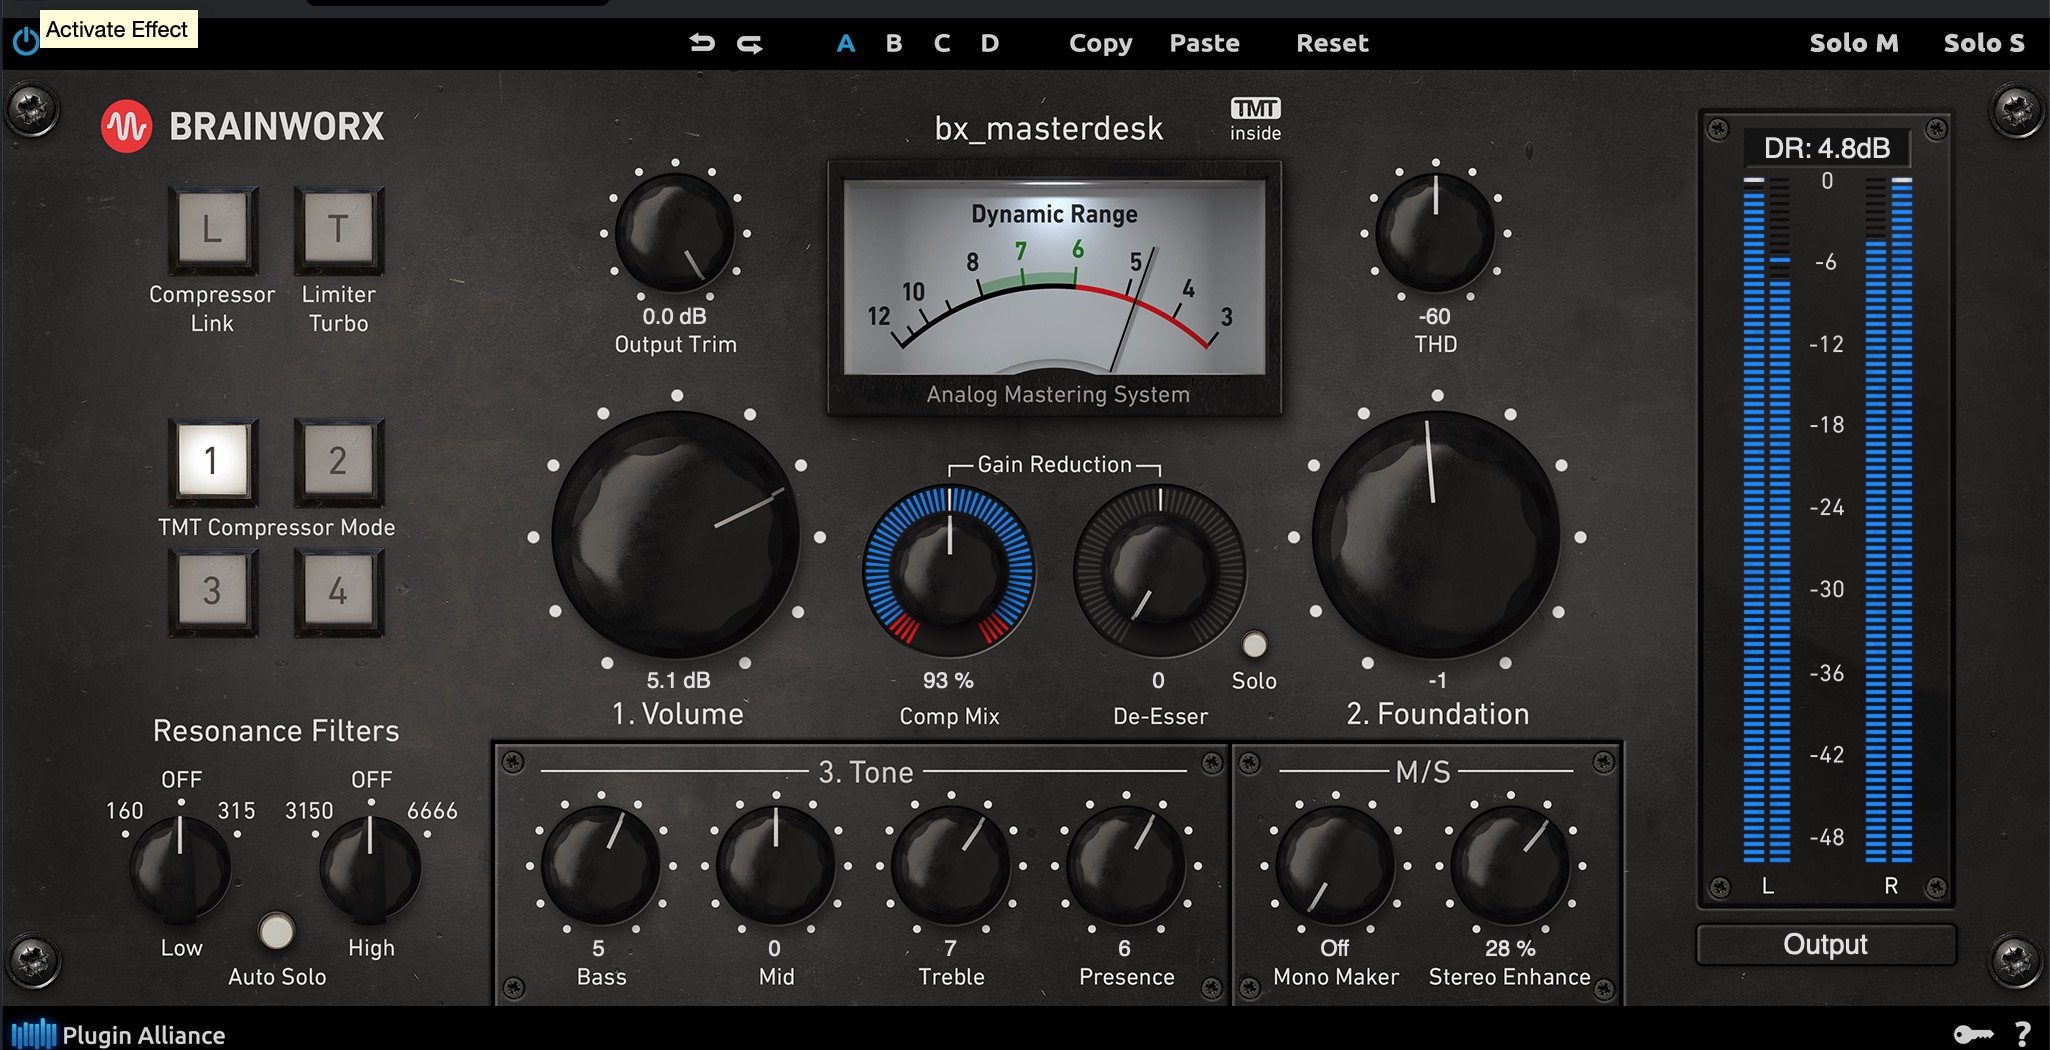 bx_masterdesk Review - Mastering for All and Complete Mastering Chain by Brainworx